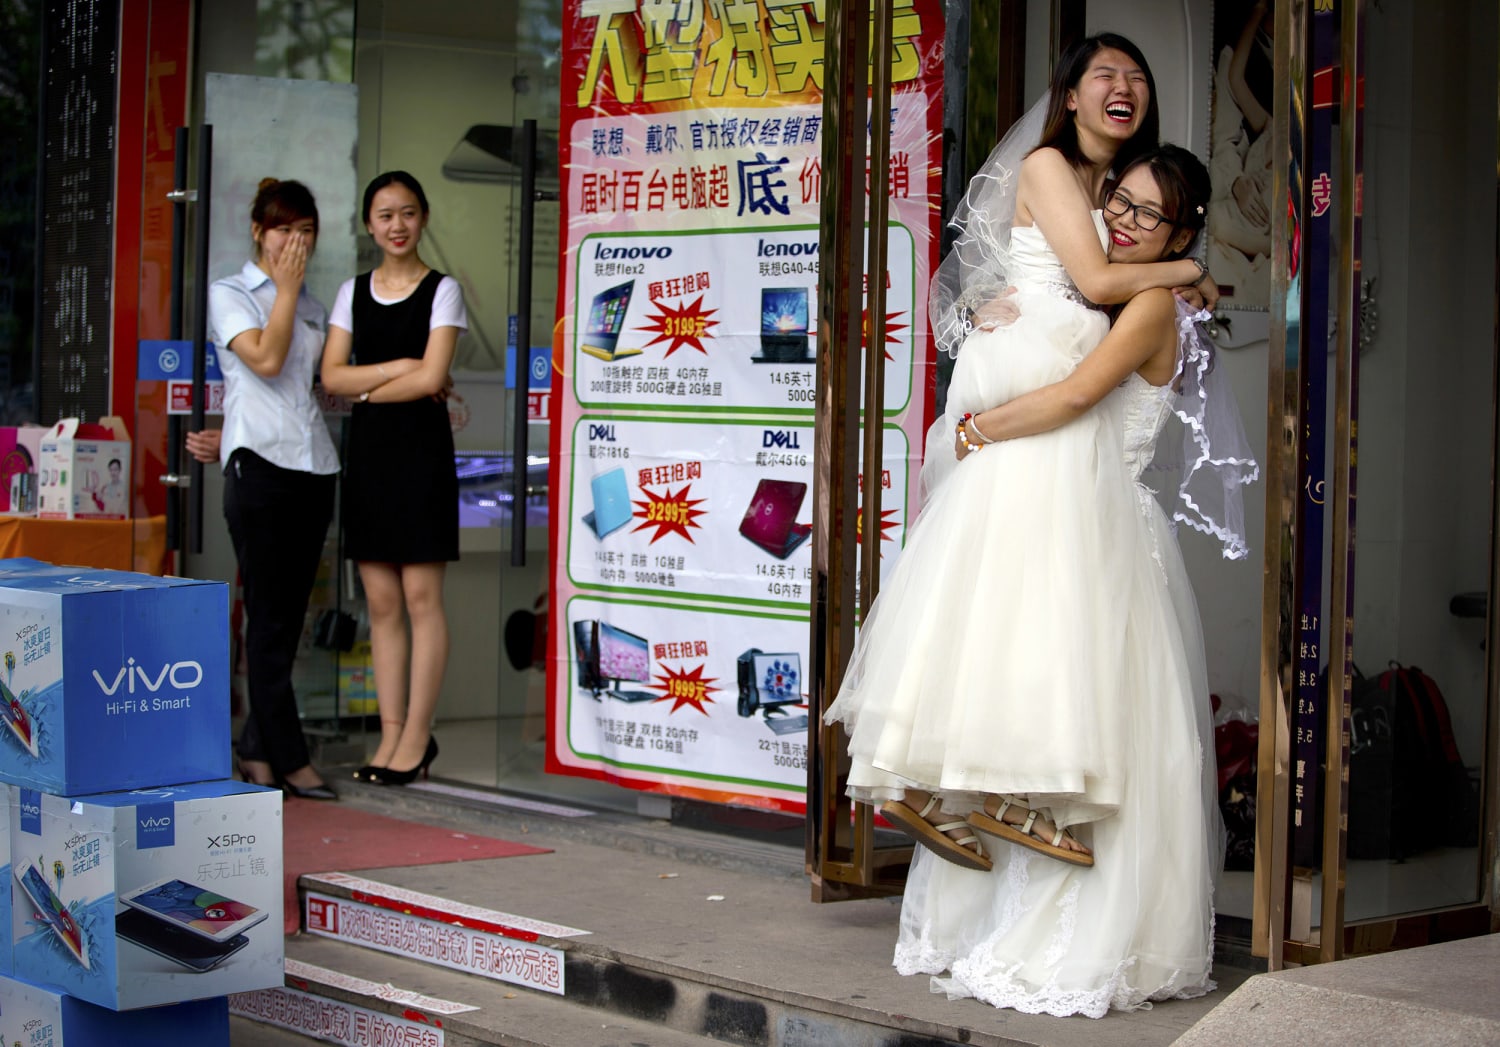 Why is China raising the prospect of same-sex marriage? image pic